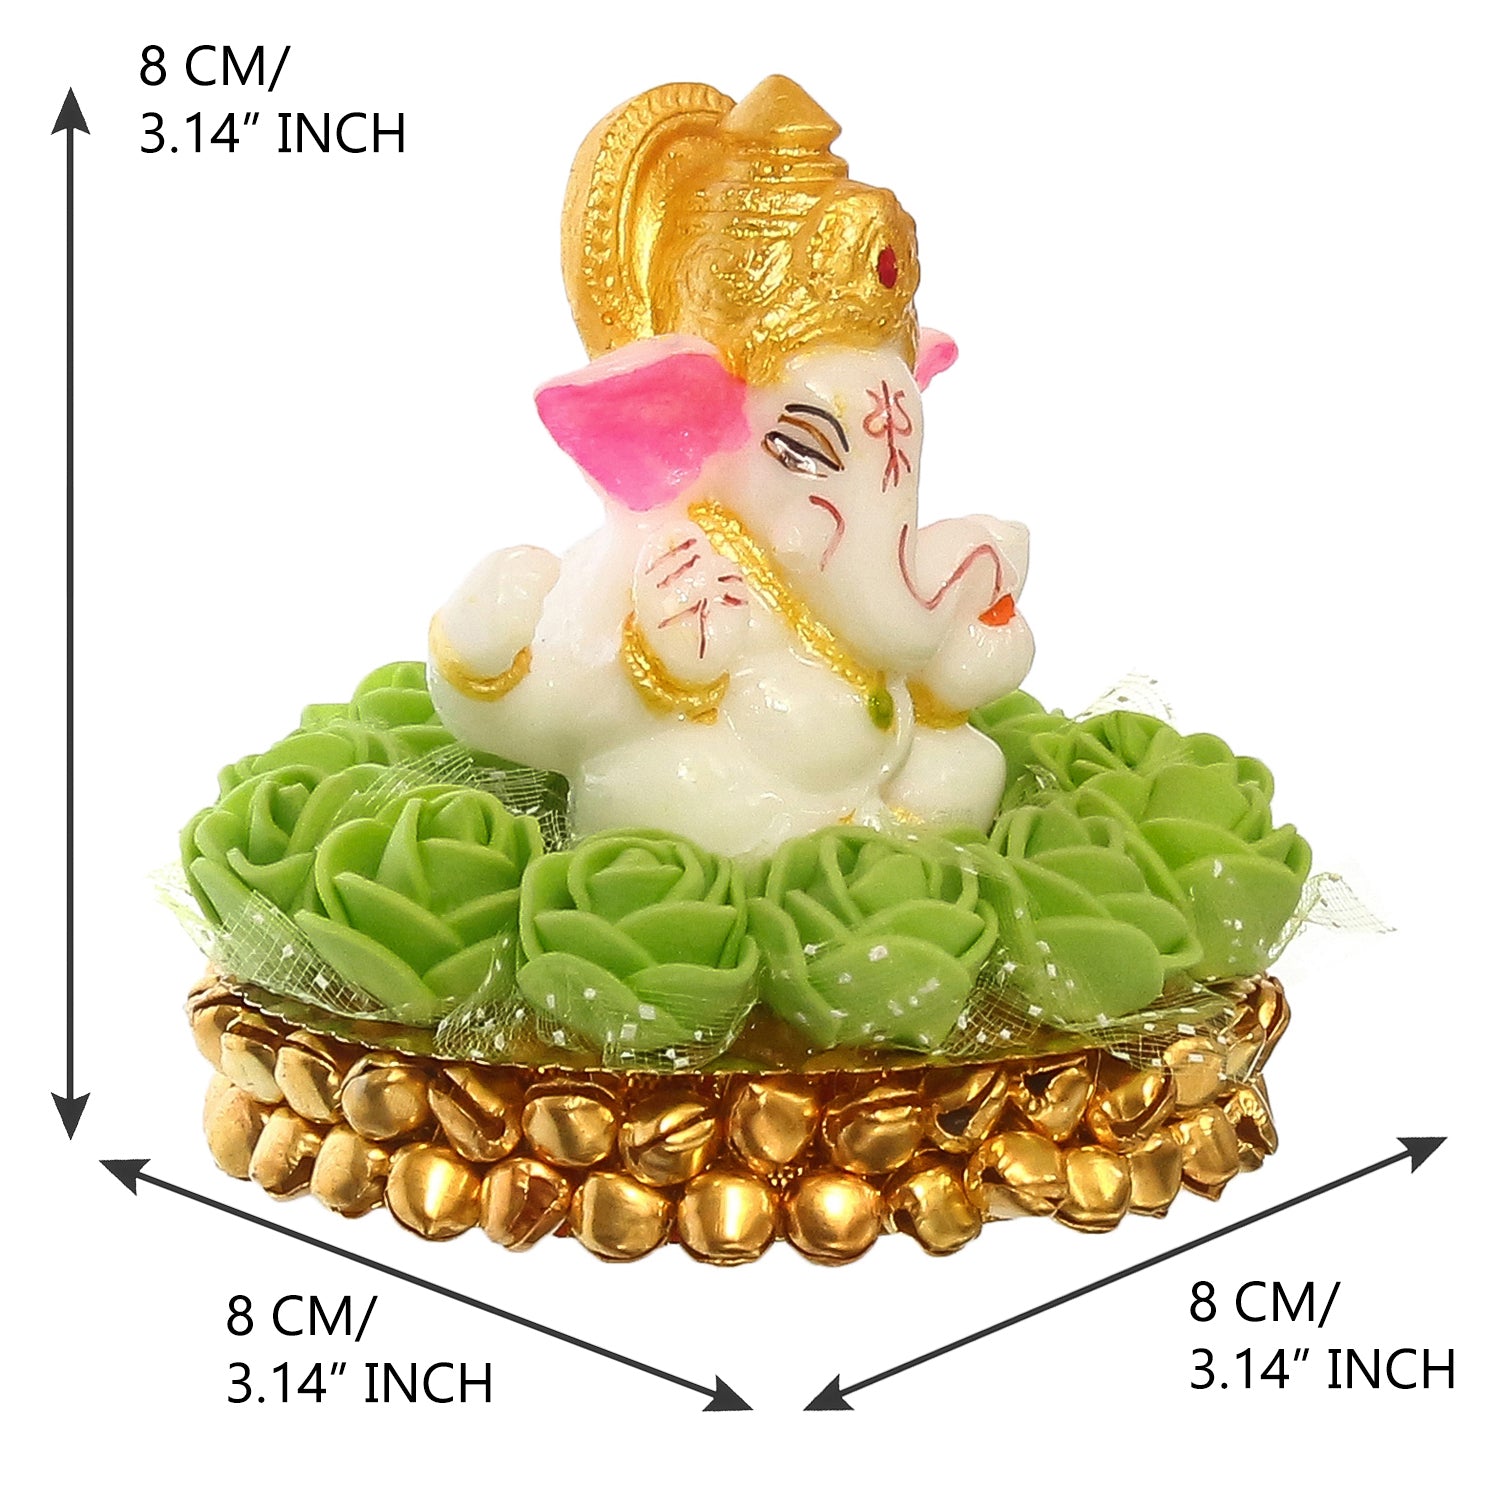 Lord Ganesha Idol on Decorative Handcrafted Plate with Green Flowers 3